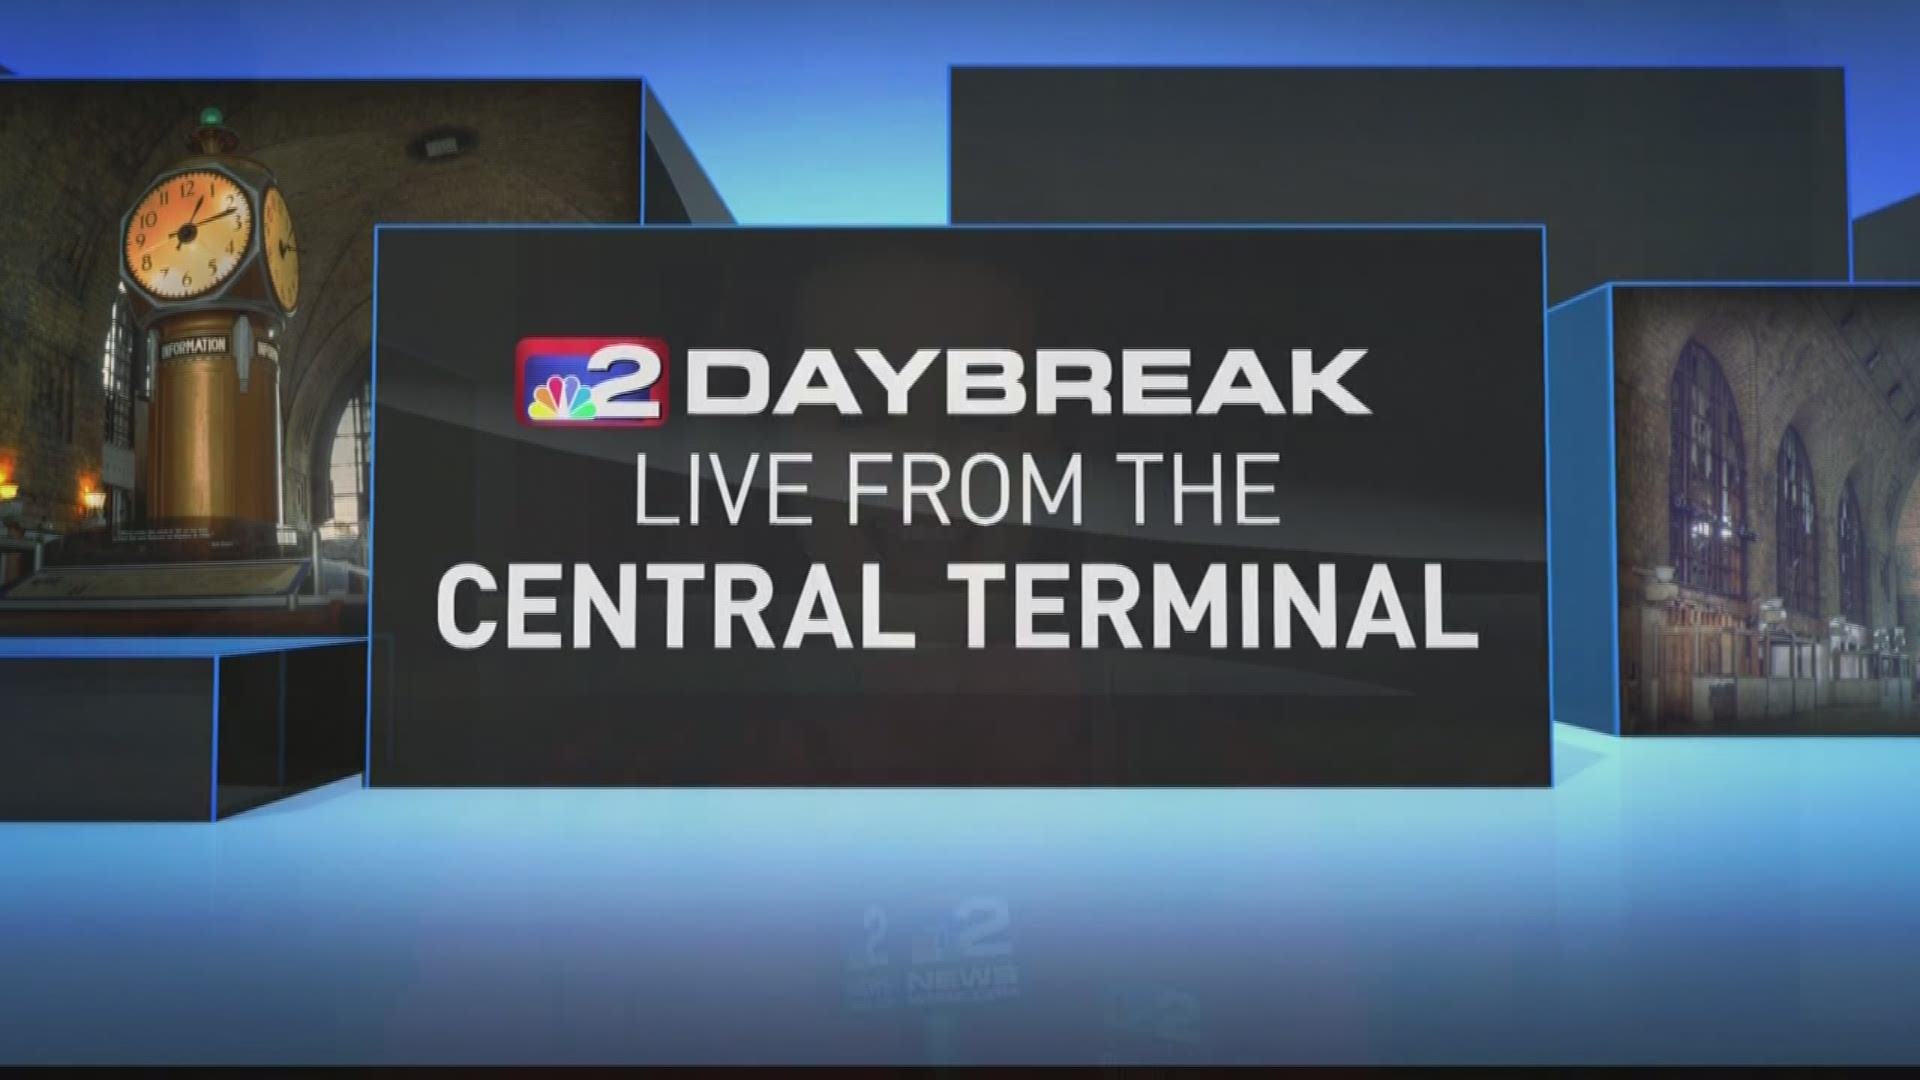 Melissa Holmes gives us an exclusive inside look of the Central Terminal